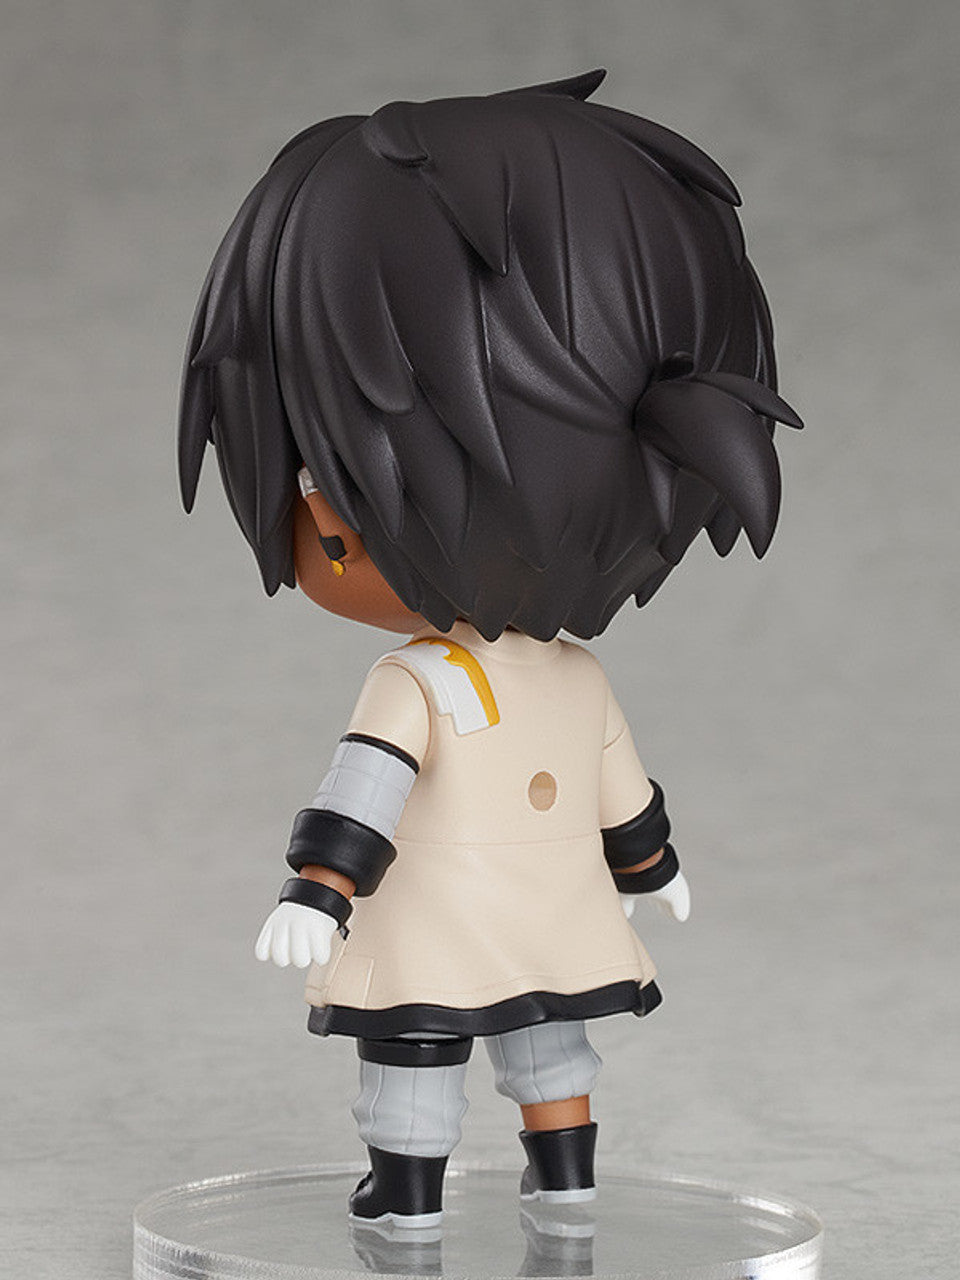 Arknights - Thorns Nendoroid image count 6